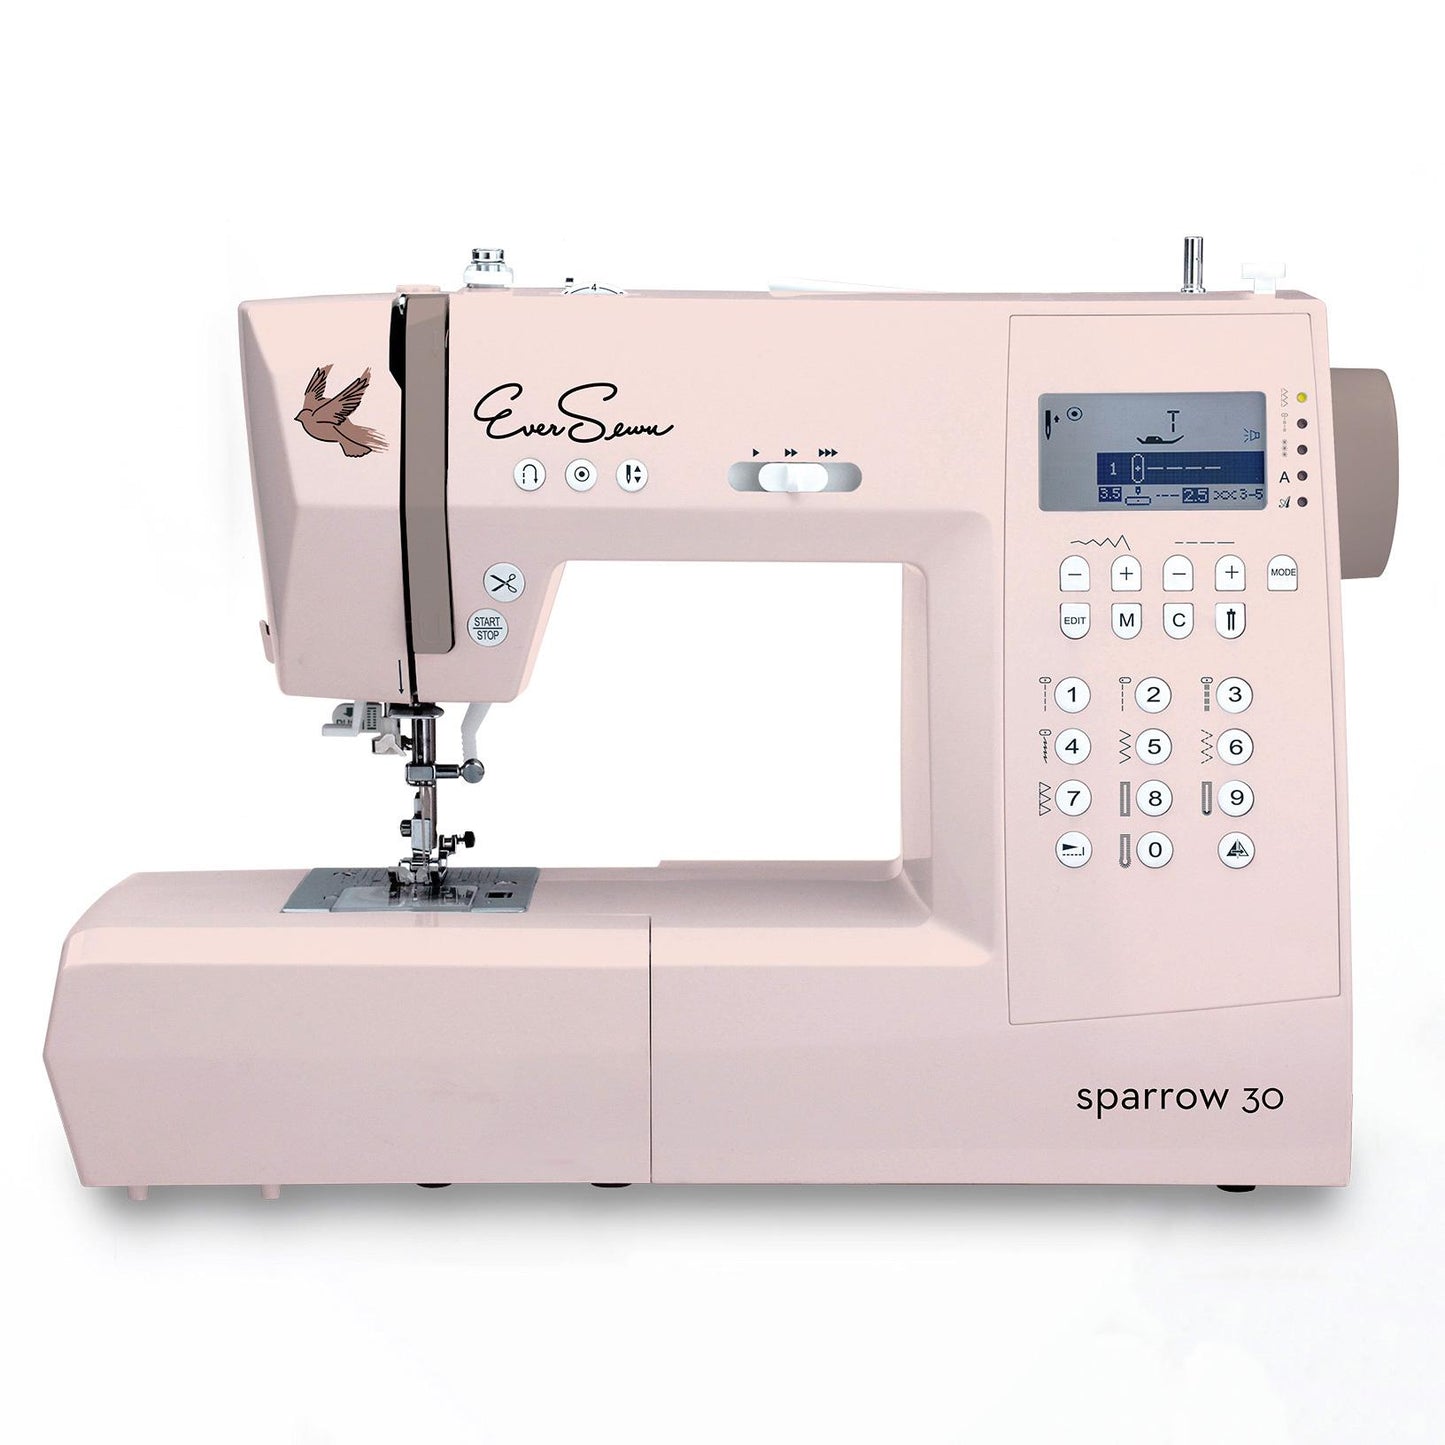 EverSewn Sparrow 30 Computerized Sewing Machine